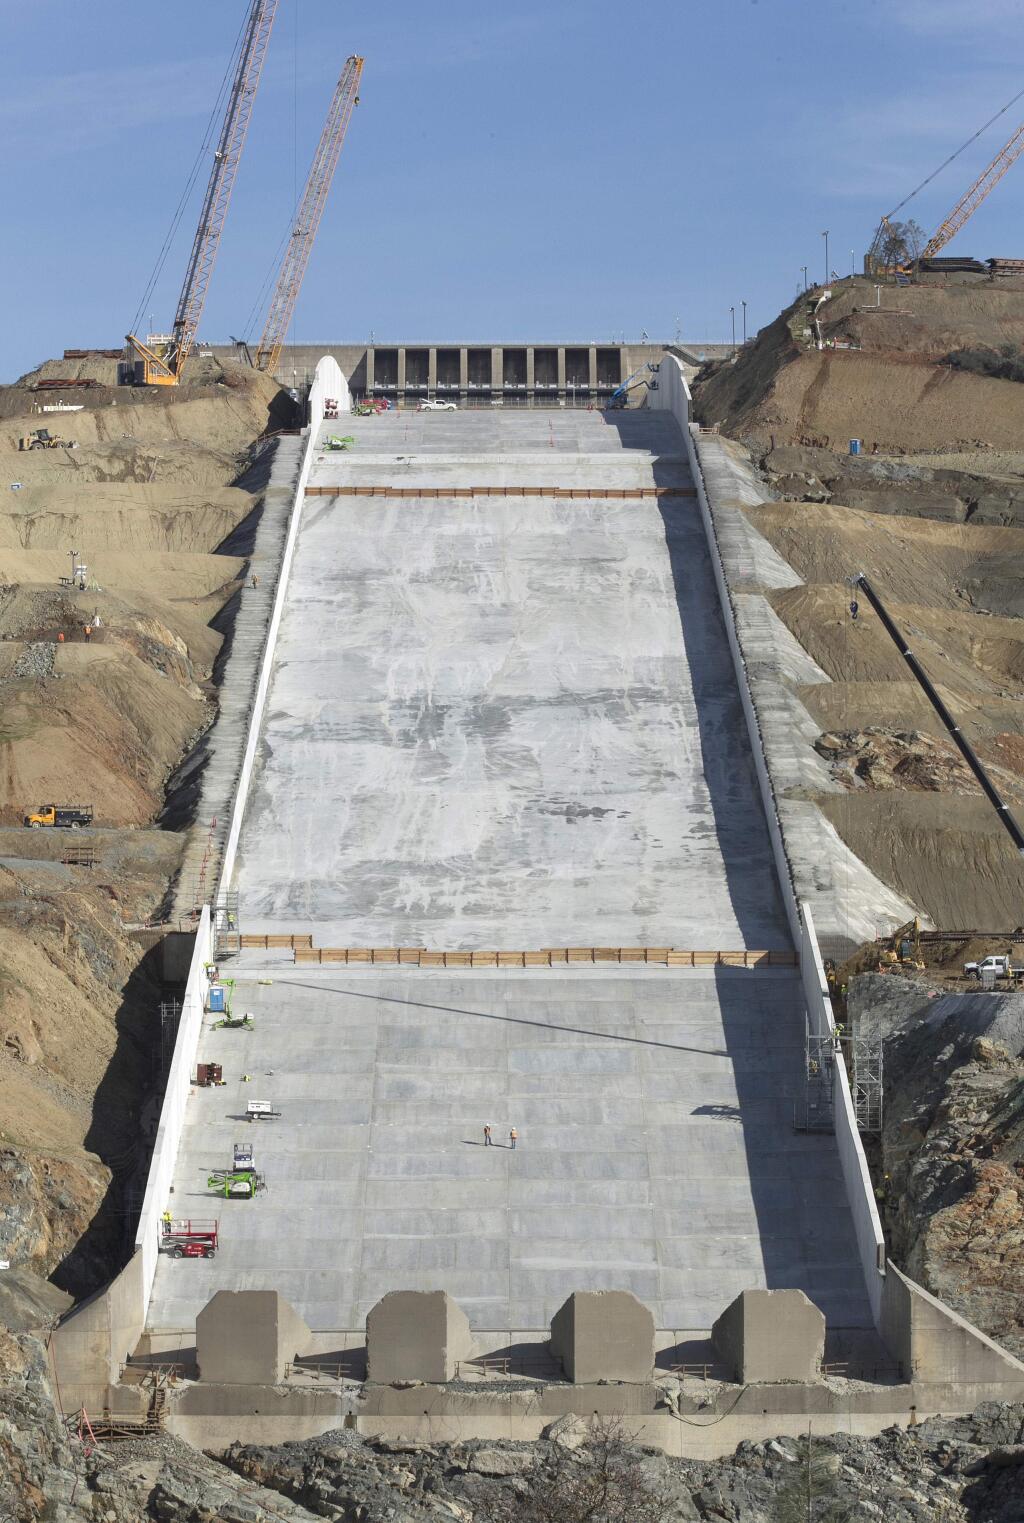 Work continues on the Oroville Dam spillway, Thursday, Nov. 30, 2017, in Oroville, Calif. California water officials and the construction manager said Thursday, that recently found hairline cracks on the spillway are normal and expected in reinforced concrete because it shrinks as it cures. (AP Photo/Rich Pedroncelli)